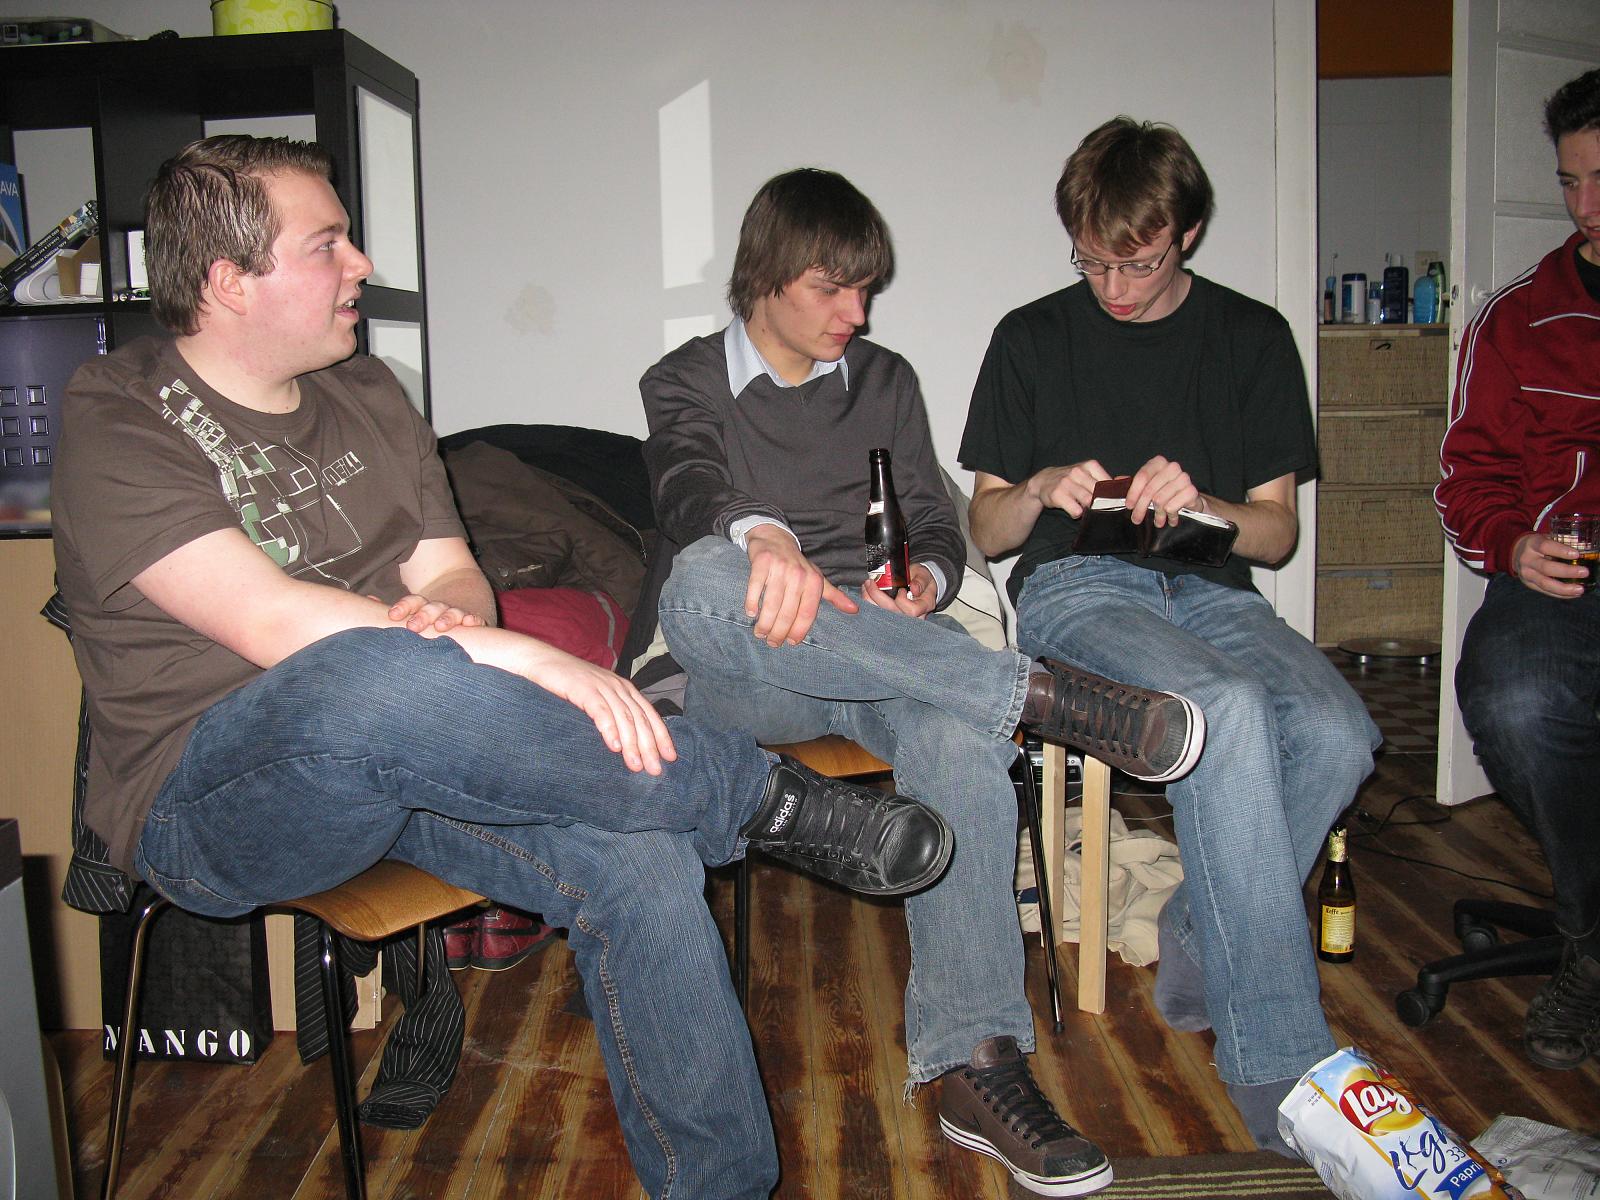 four people sitting together one is playing a game